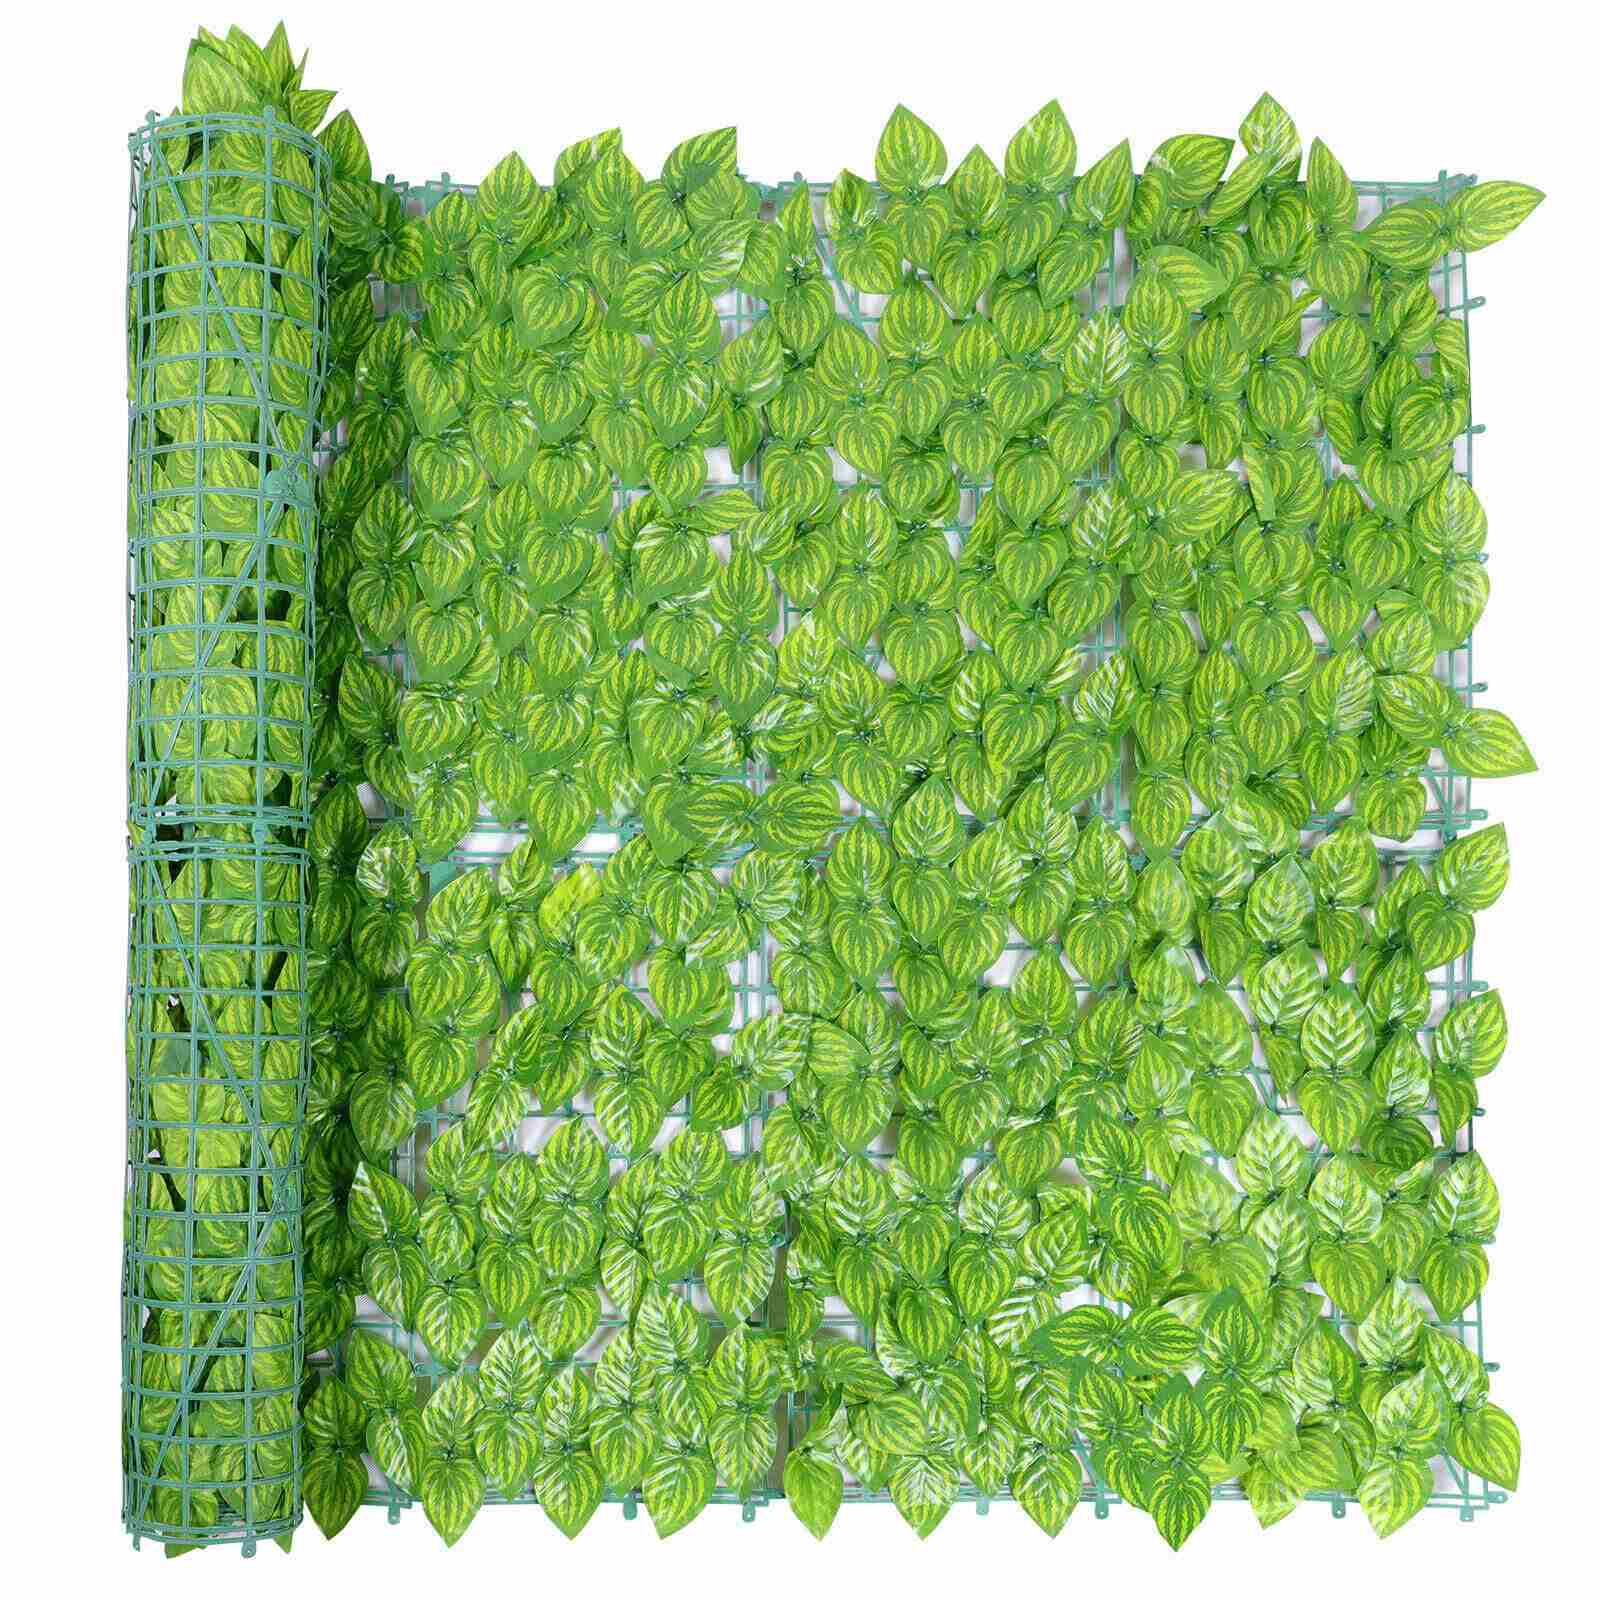 Full Display of Privacy Artificial Fence Screen Faux Ivy Leaf